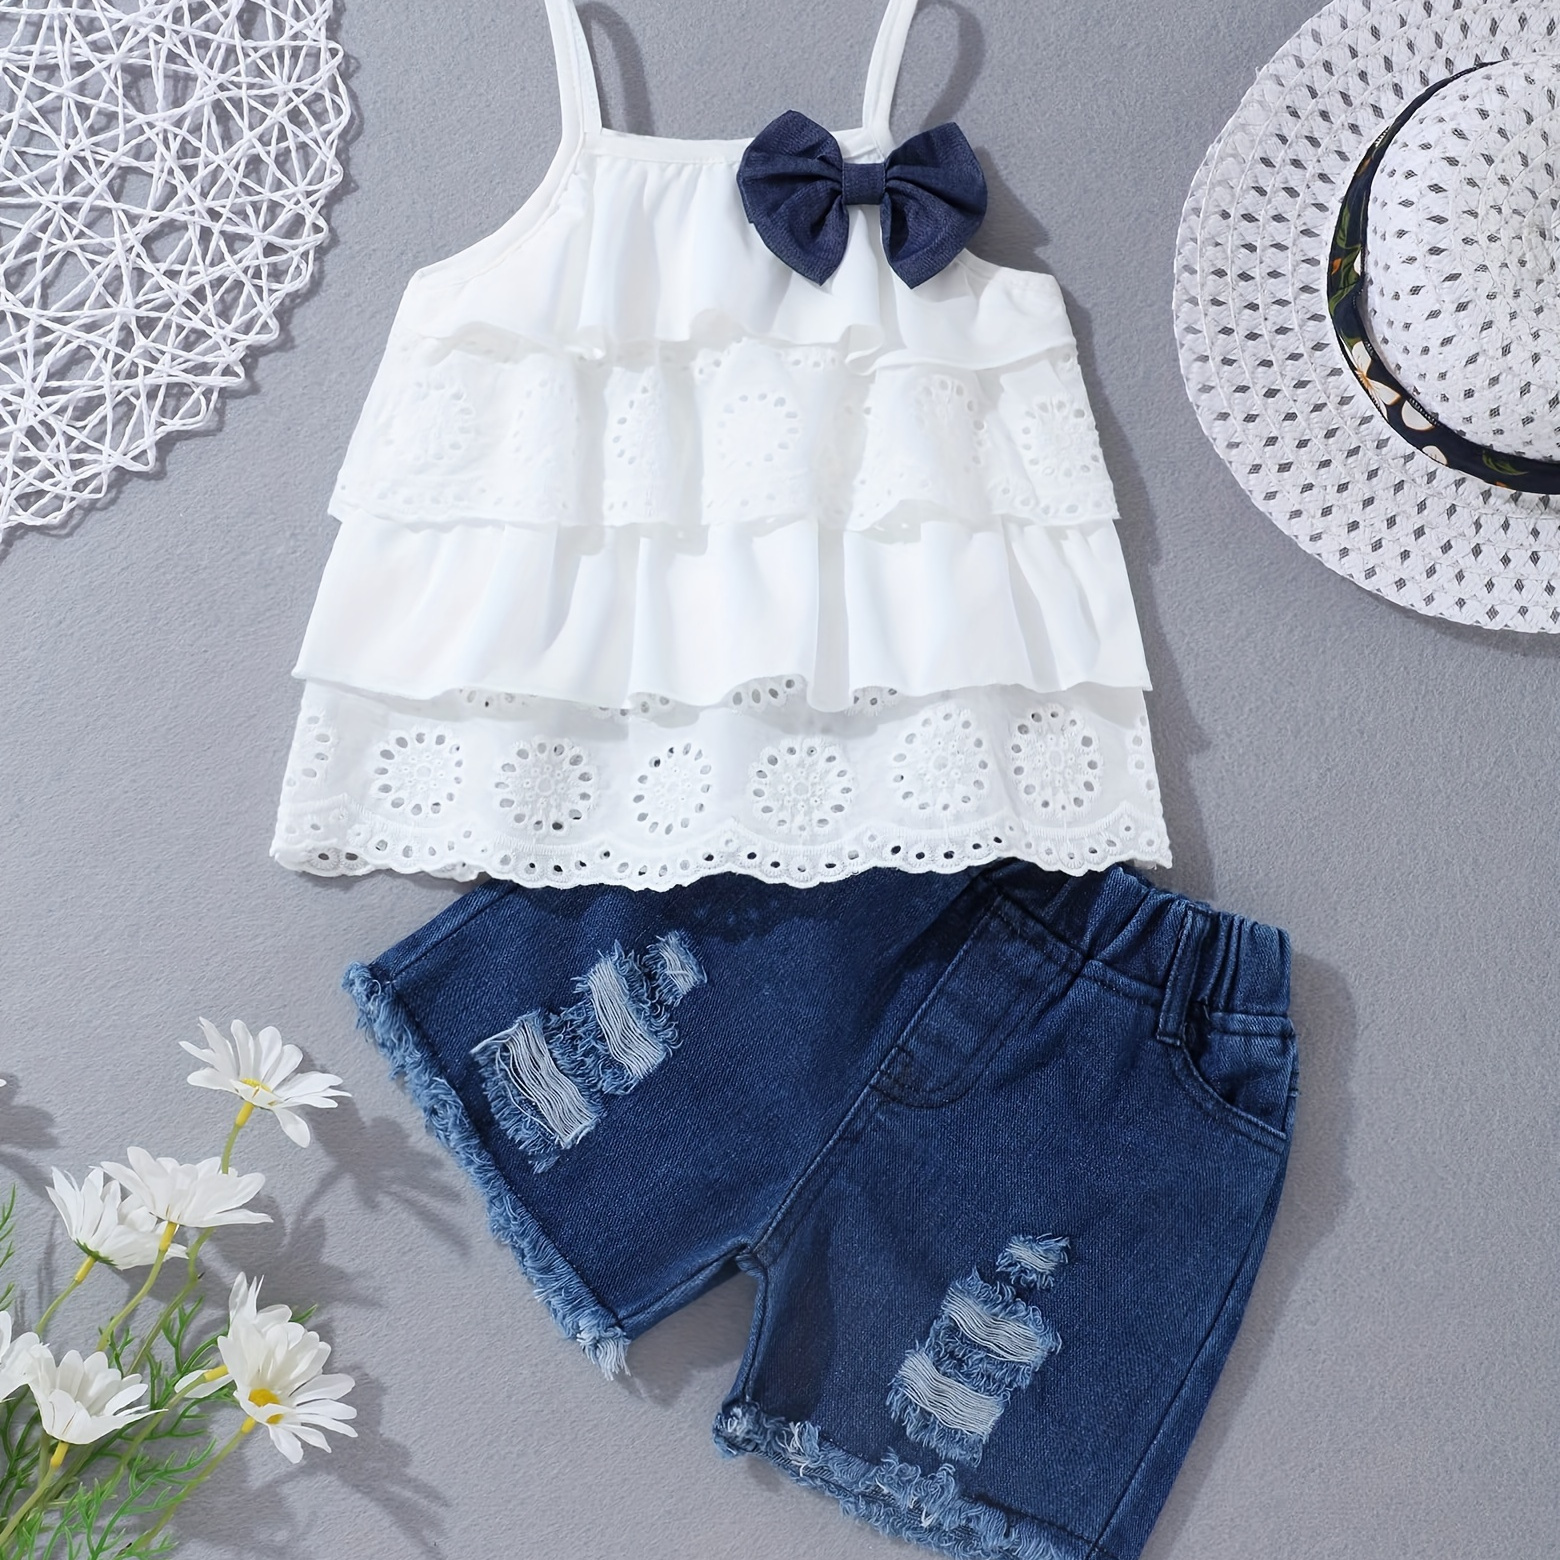 

Toddler Baby Girls Summer Clothes Outfits Ruffle Camisole Spot Dot Tops And Casual Shorts Newborn Girl Clothing